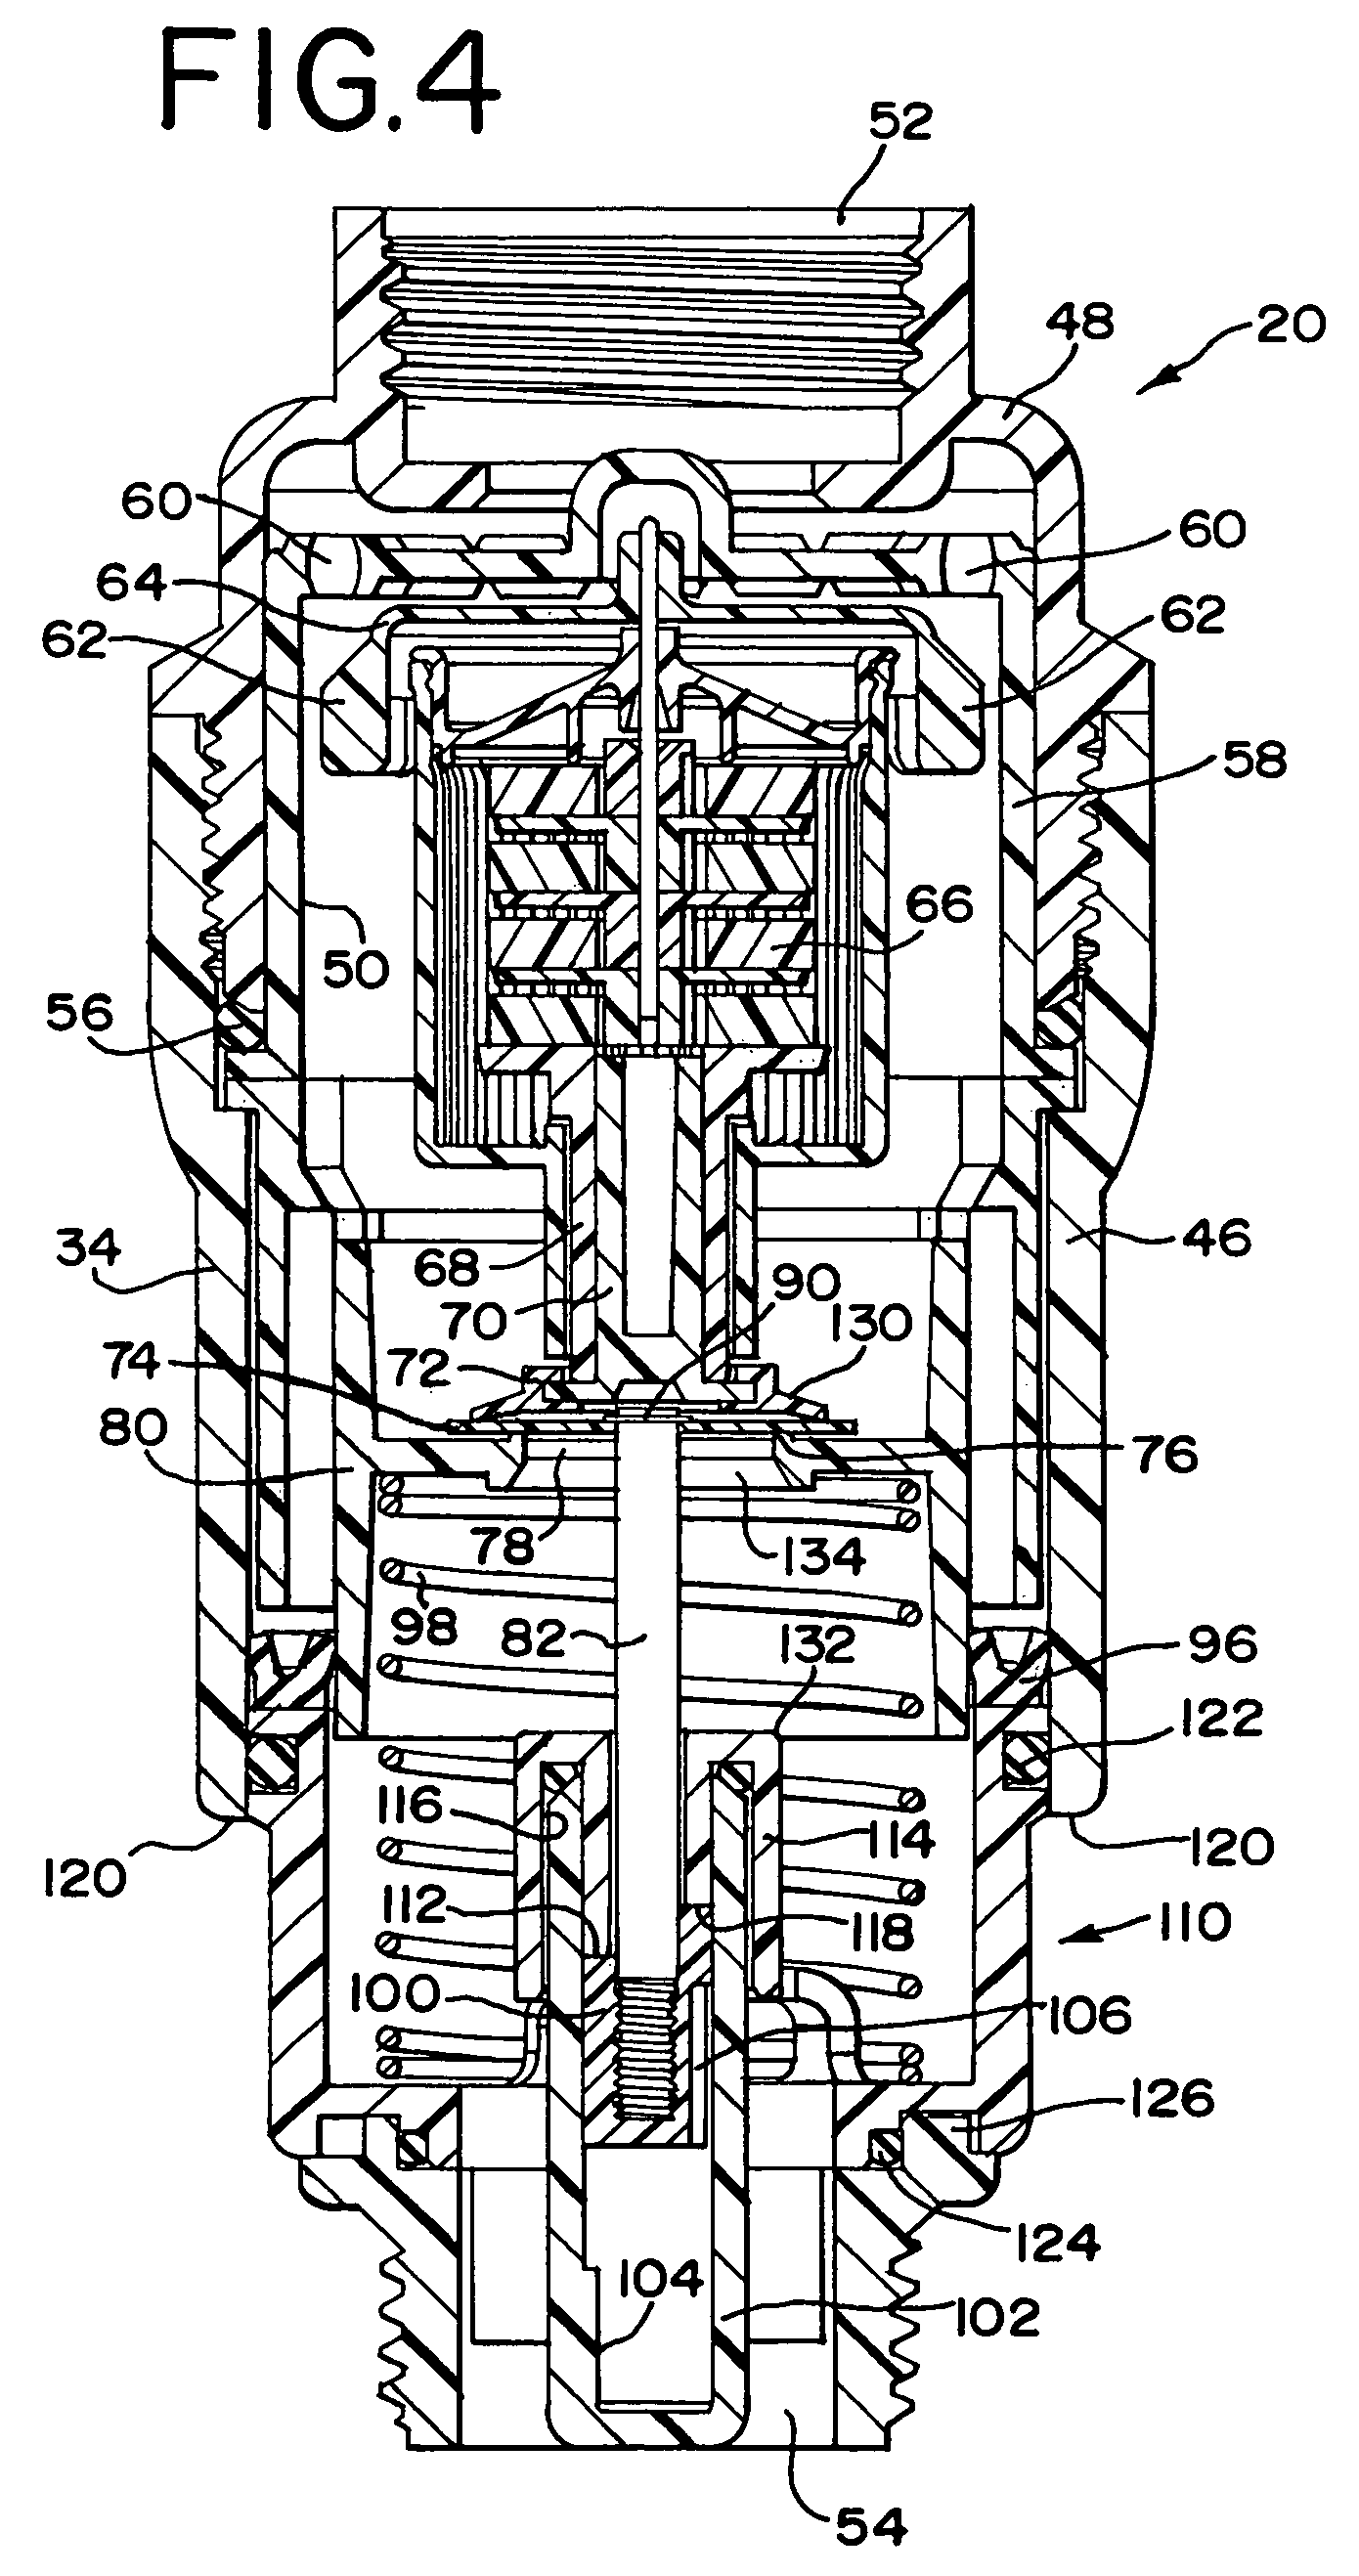 Flow volume limiting device